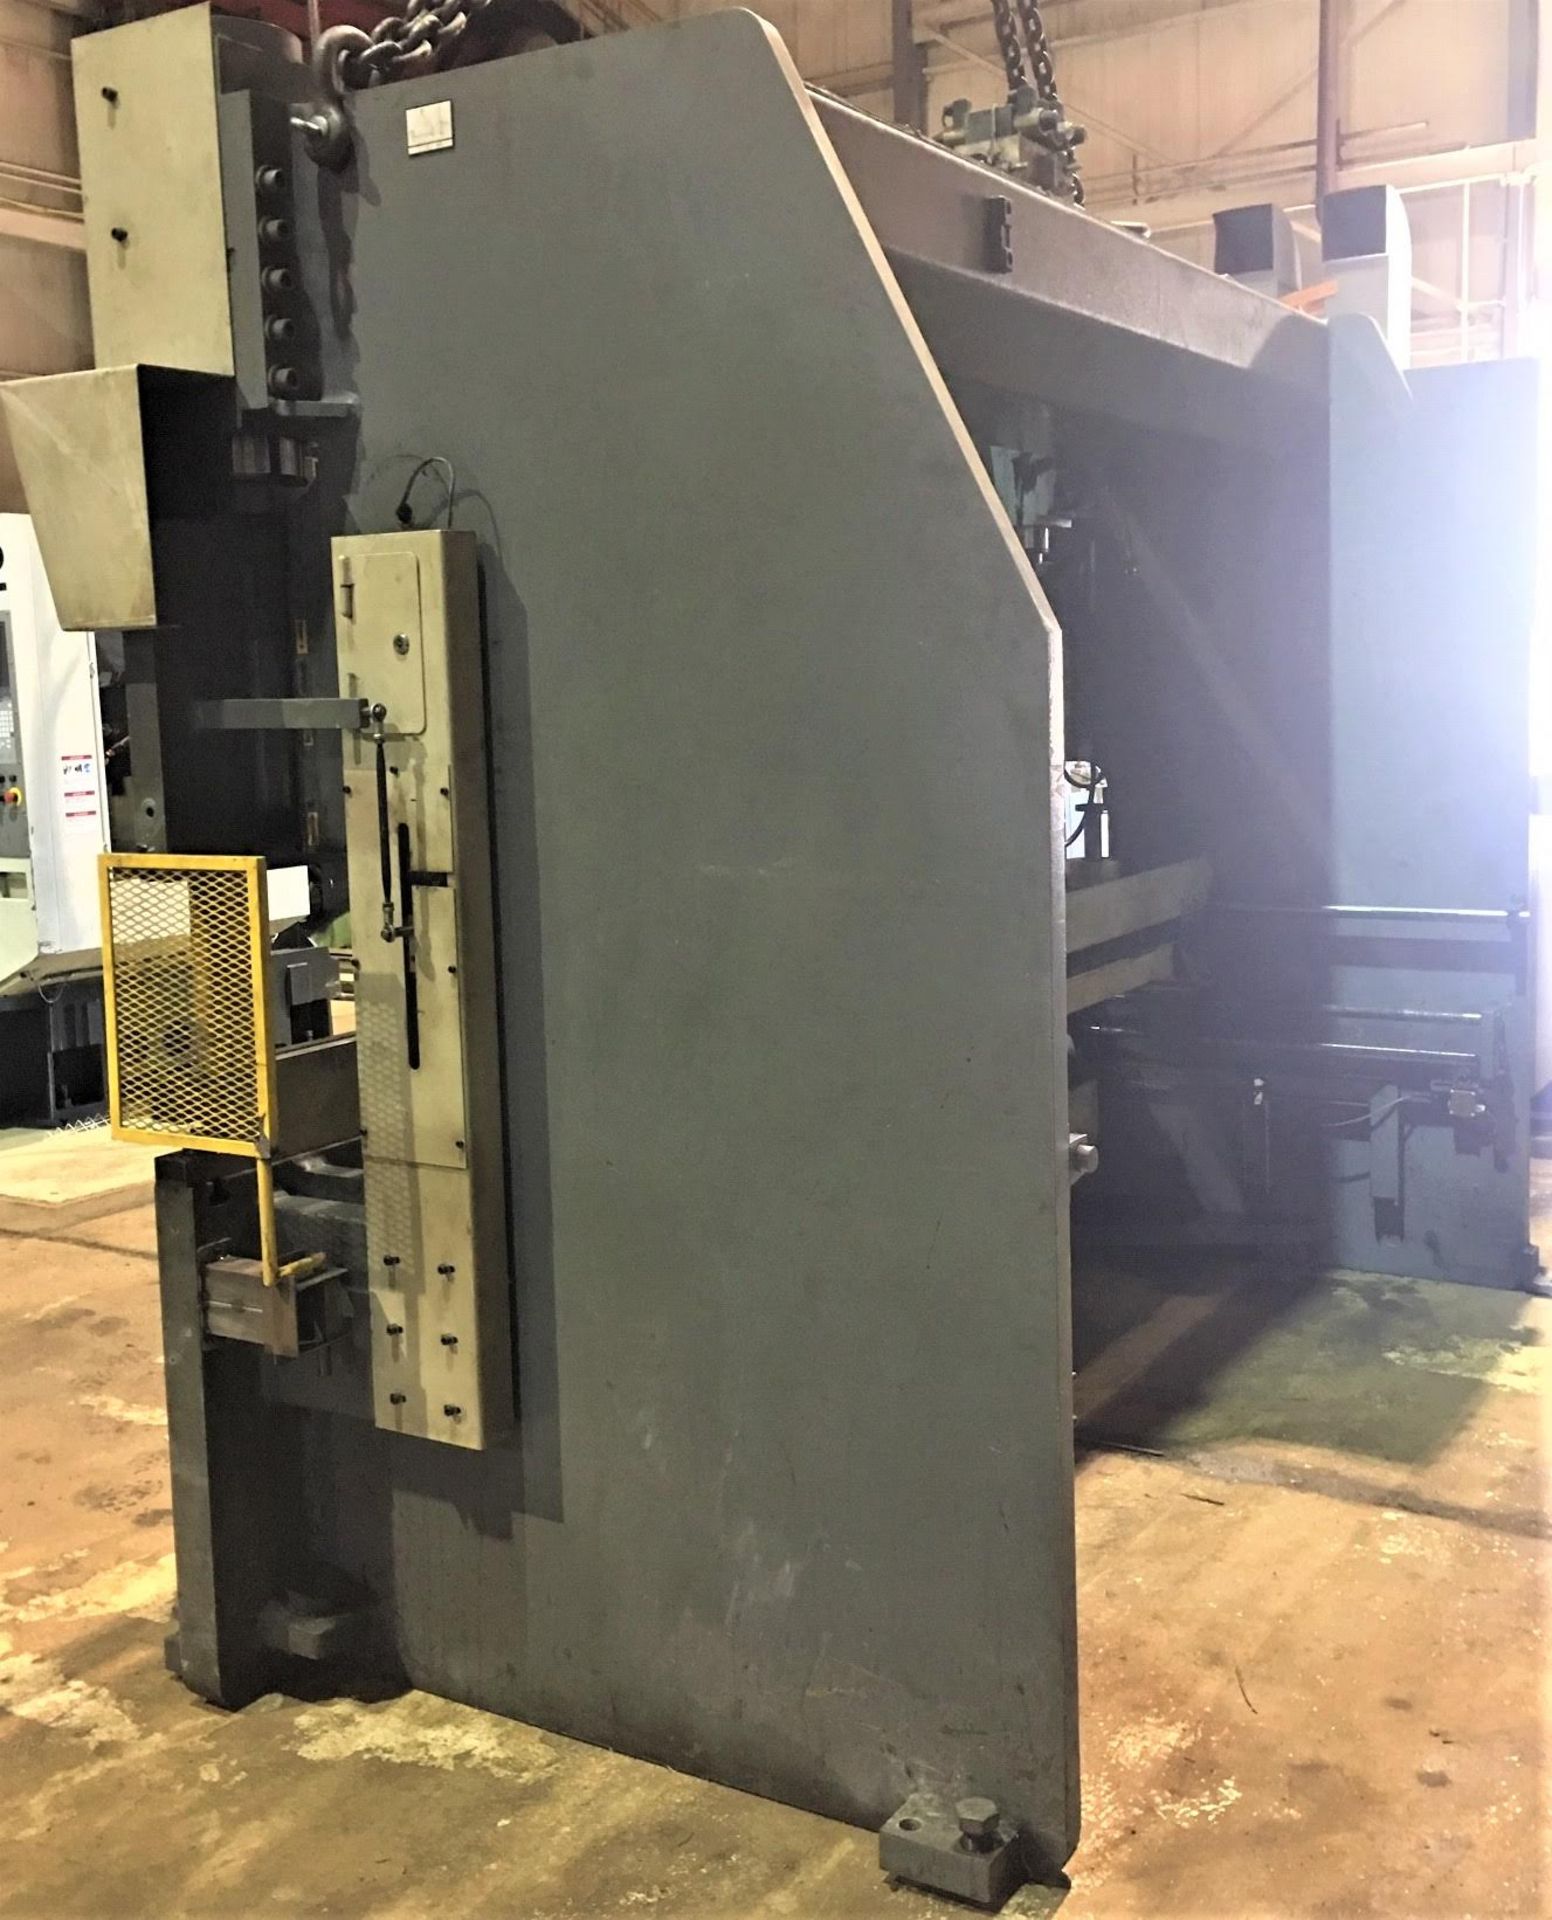 Haco Atlantic CNC Hydraulic Press Brake 120 Ton x 10', Located In Painesville, OH - 8615P - Image 10 of 14